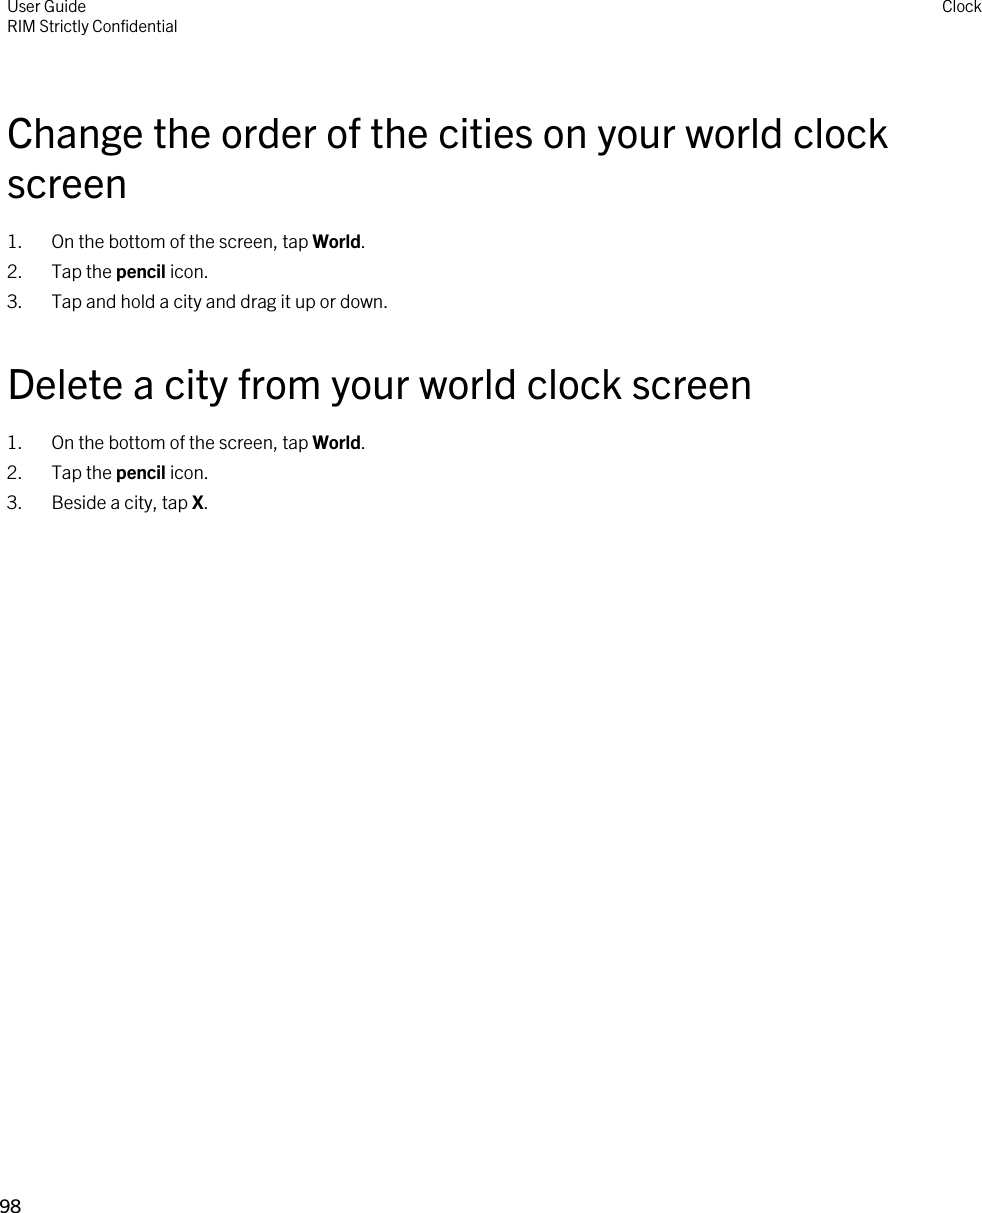 Change the order of the cities on your world clock screen1. On the bottom of the screen, tap World.2. Tap the pencil icon.3. Tap and hold a city and drag it up or down.Delete a city from your world clock screen1. On the bottom of the screen, tap World.2. Tap the pencil icon.3. Beside a city, tap X.User GuideRIM Strictly Confidential Clock98 